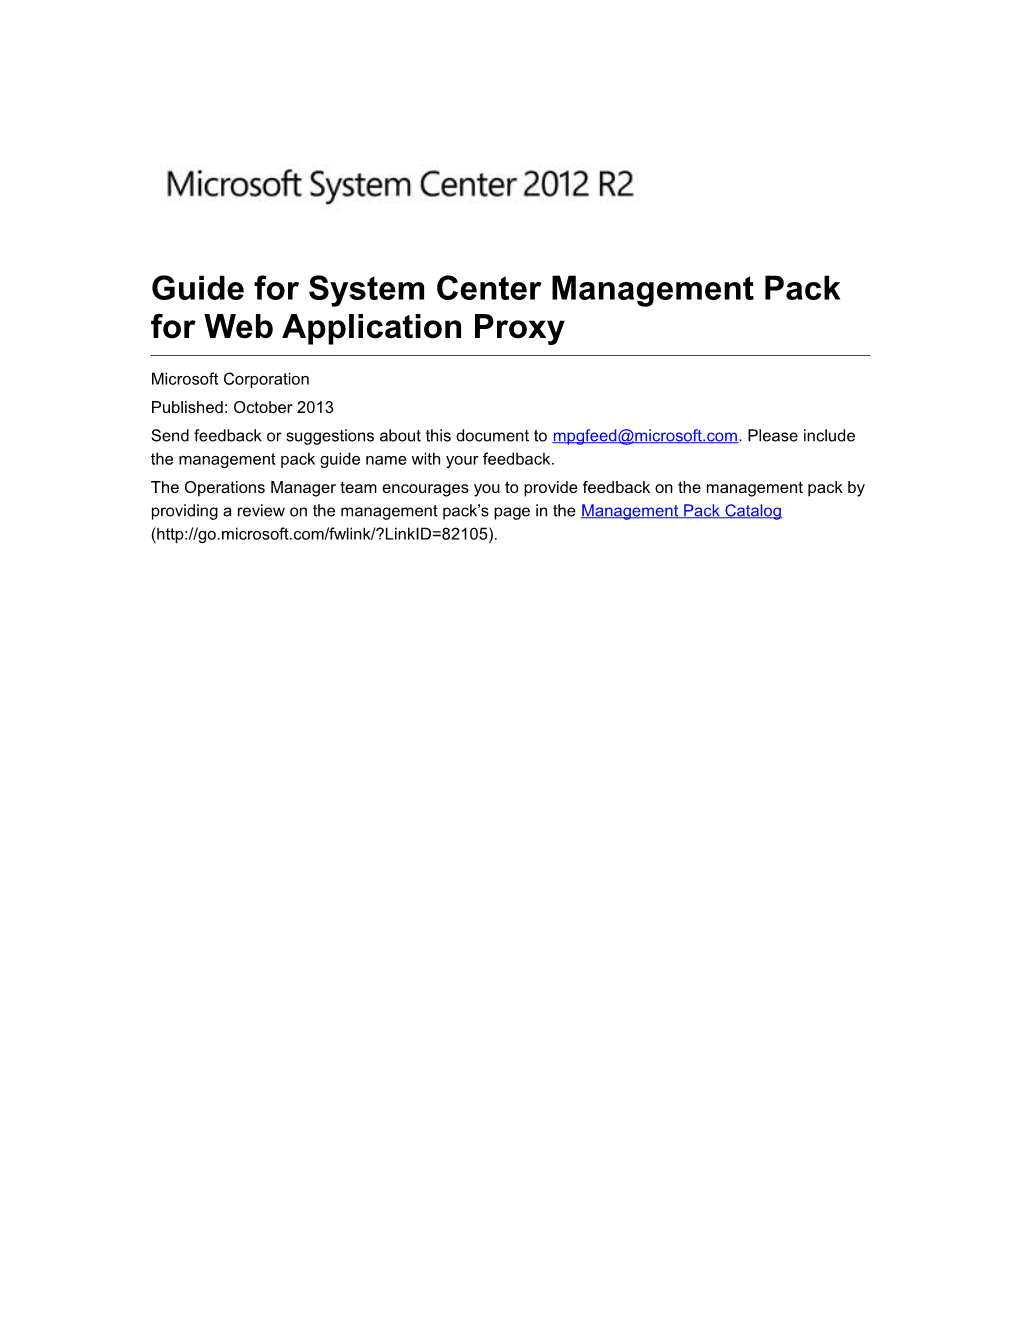 Guide for System Center Management Pack for Web Application Proxy